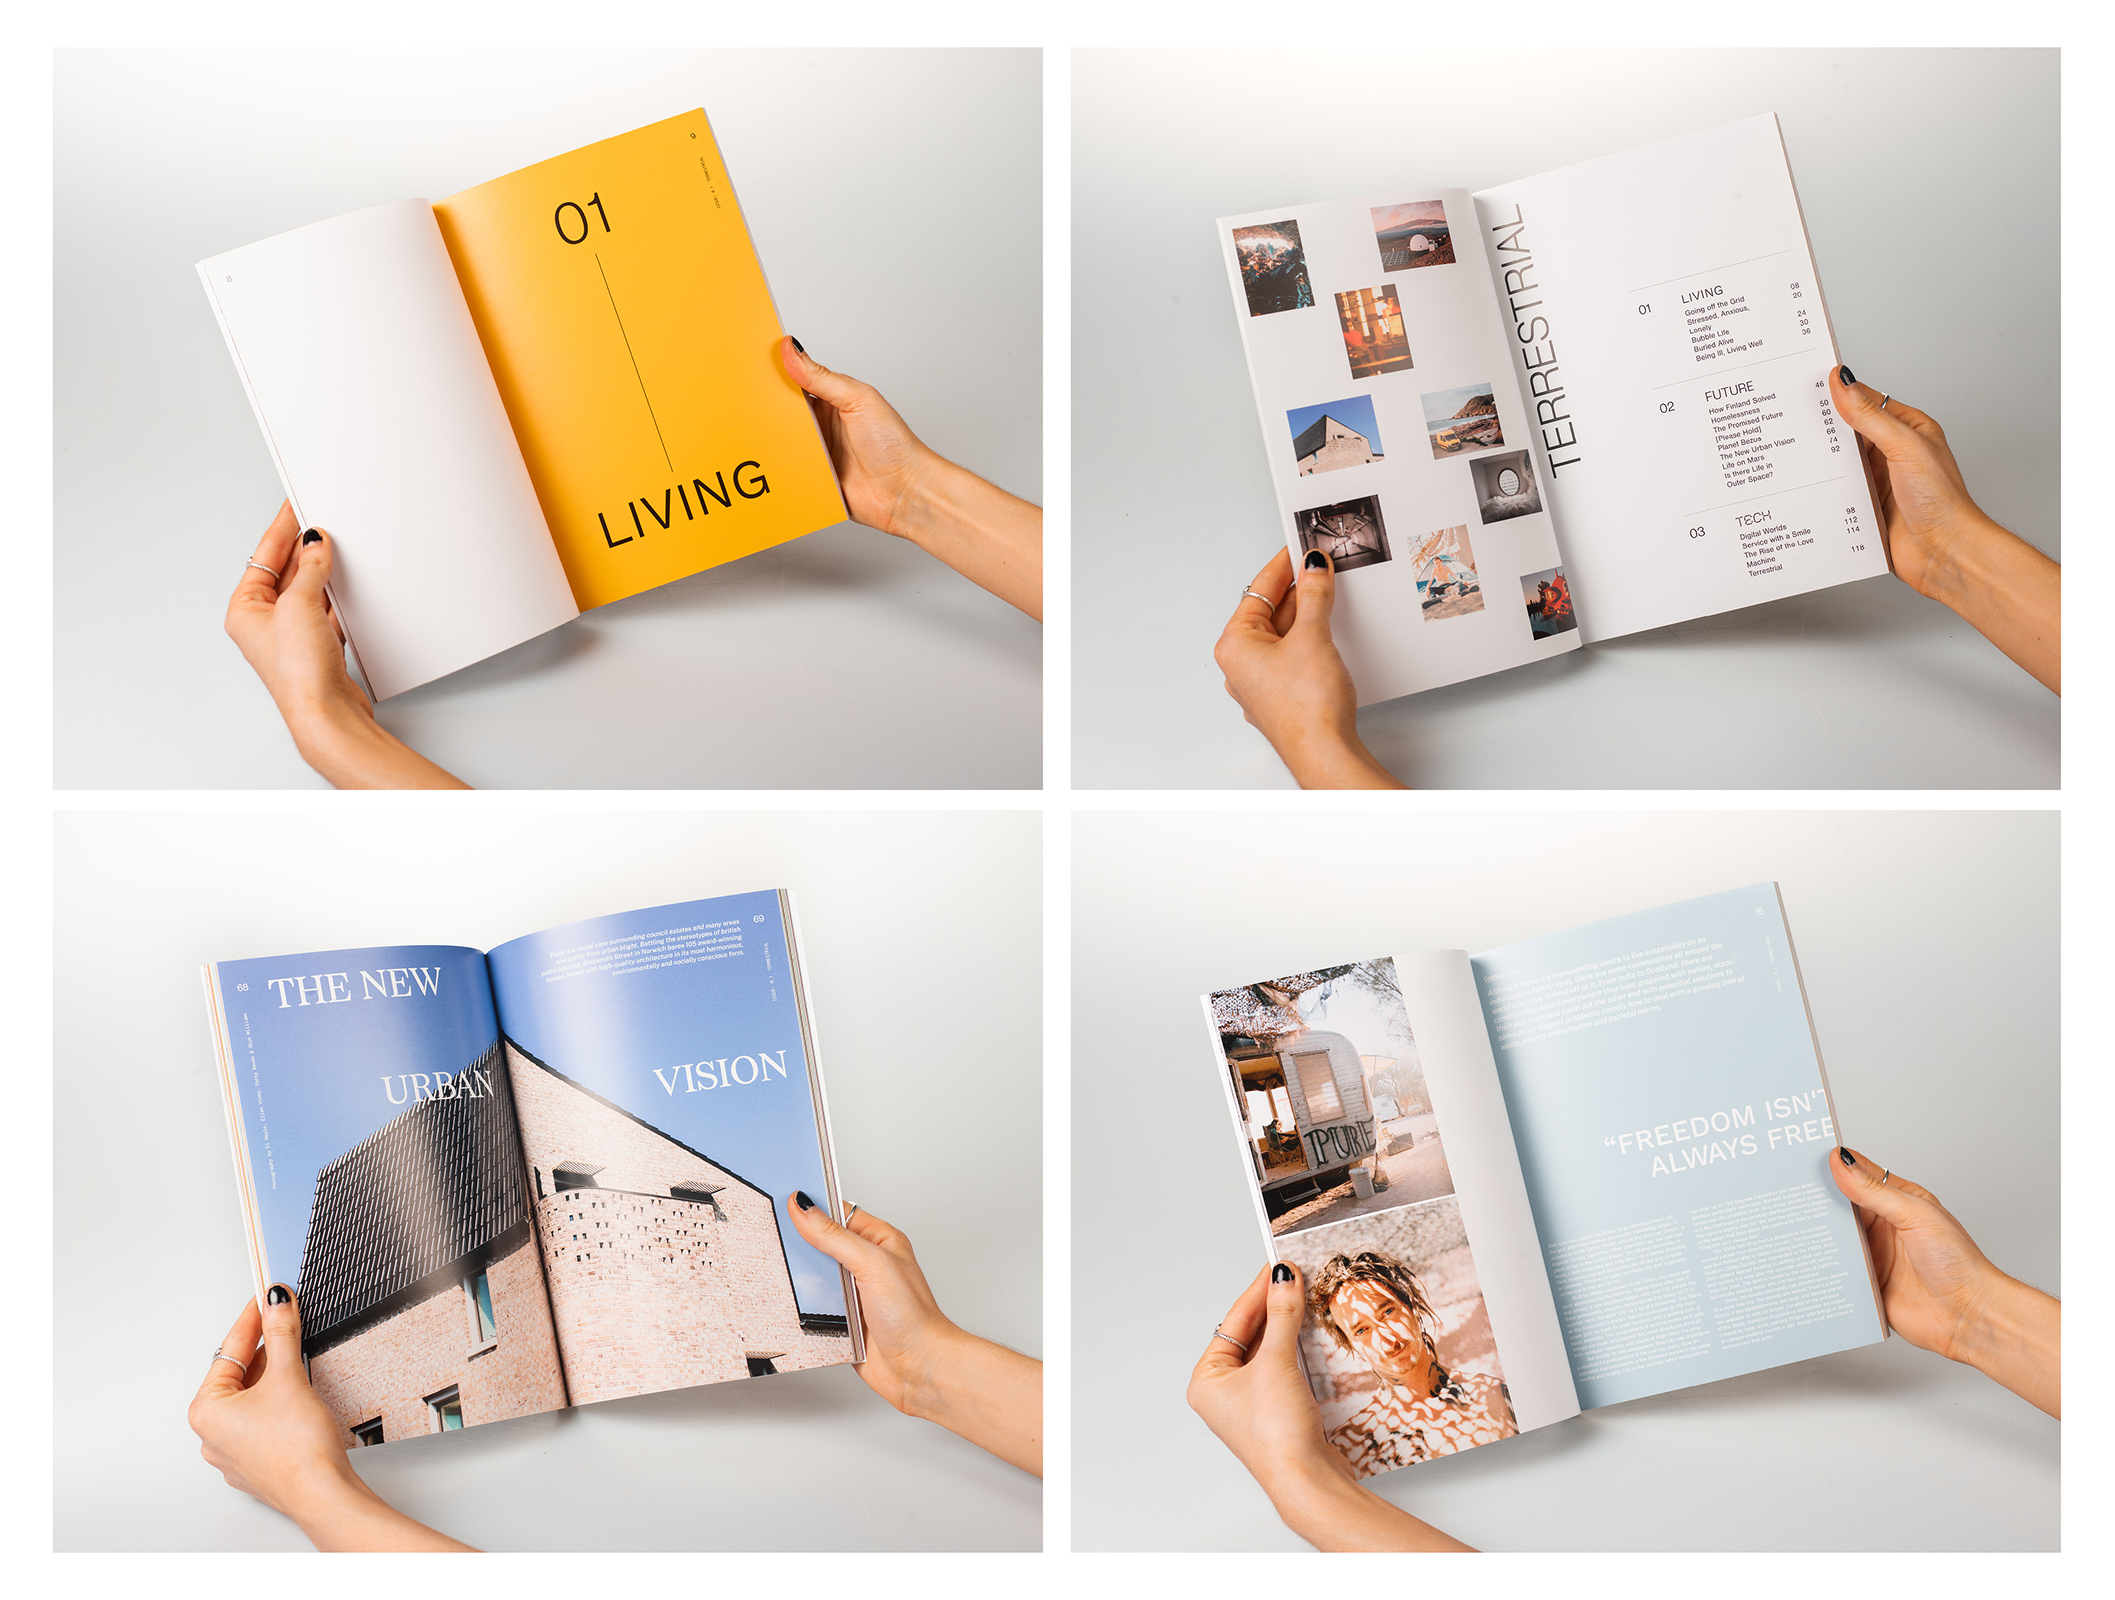 BA Design for Publishing work by Skye Williams showing 4 magazine spreads that show simplistic and modern design.